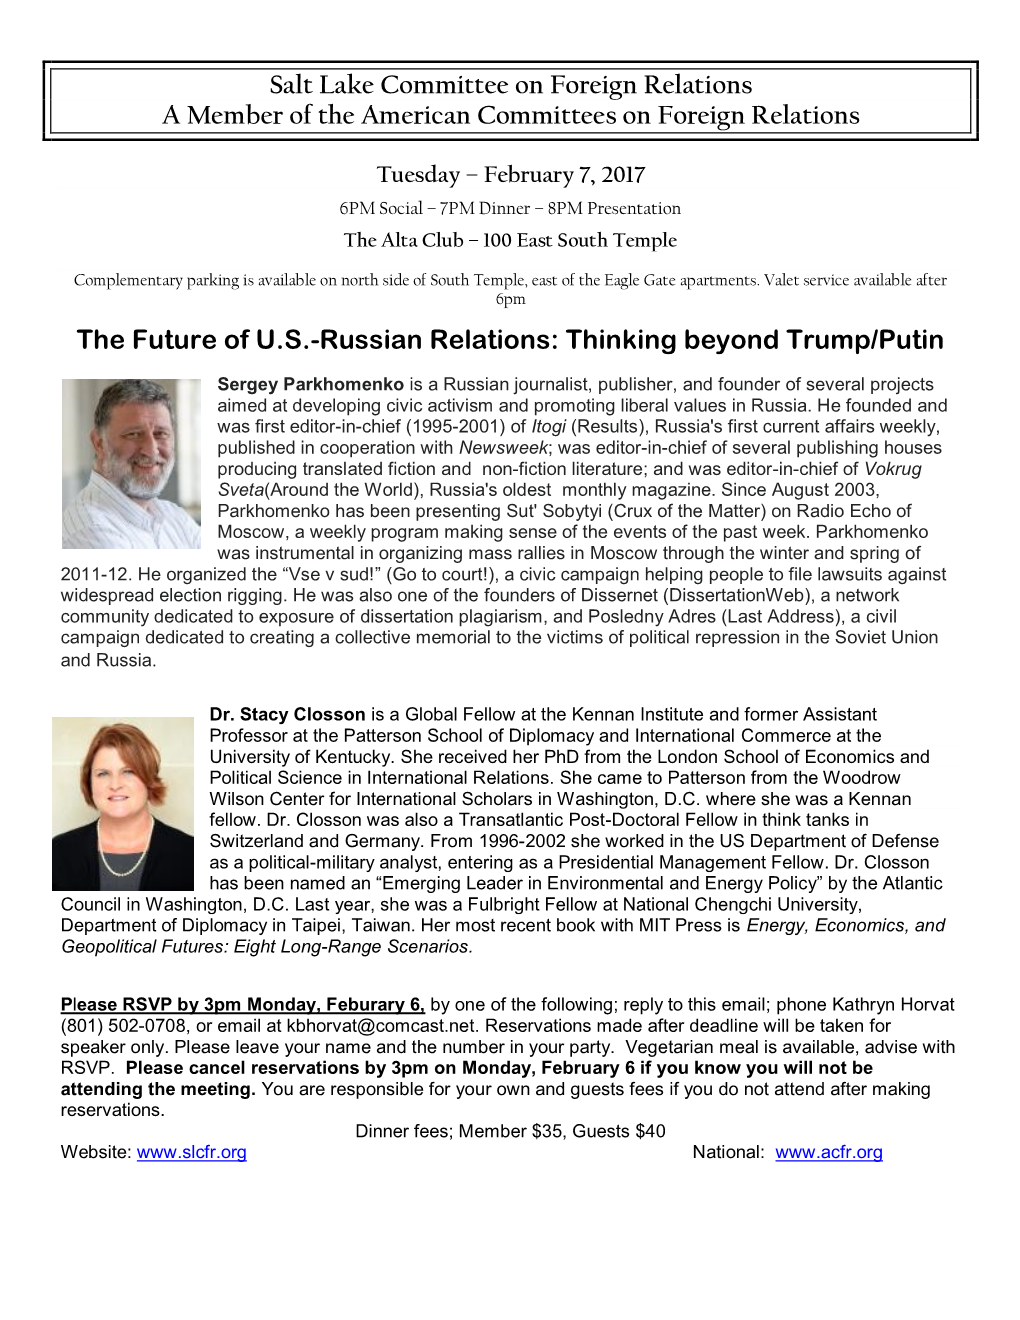 The Future of US-Russian Relations